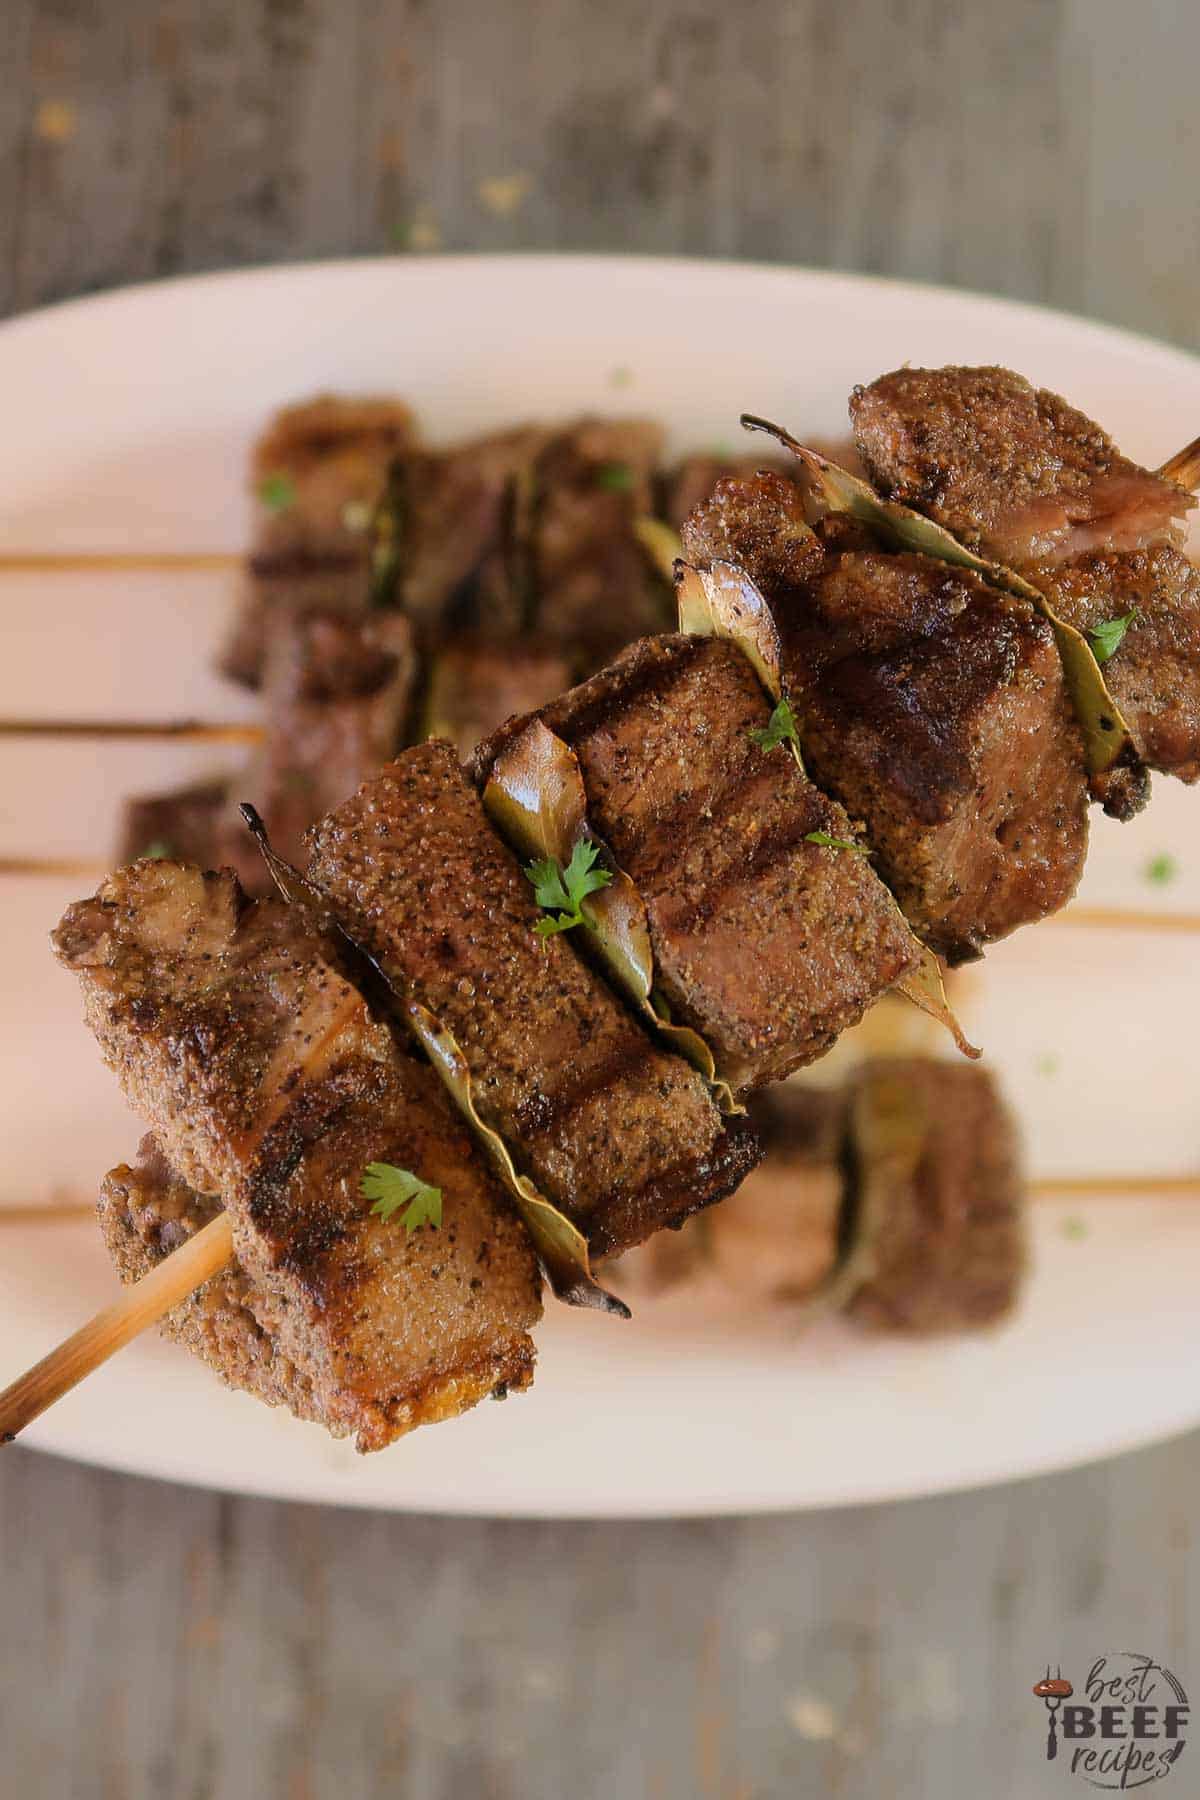 Holding up a beef kabob over a plate of kabobs